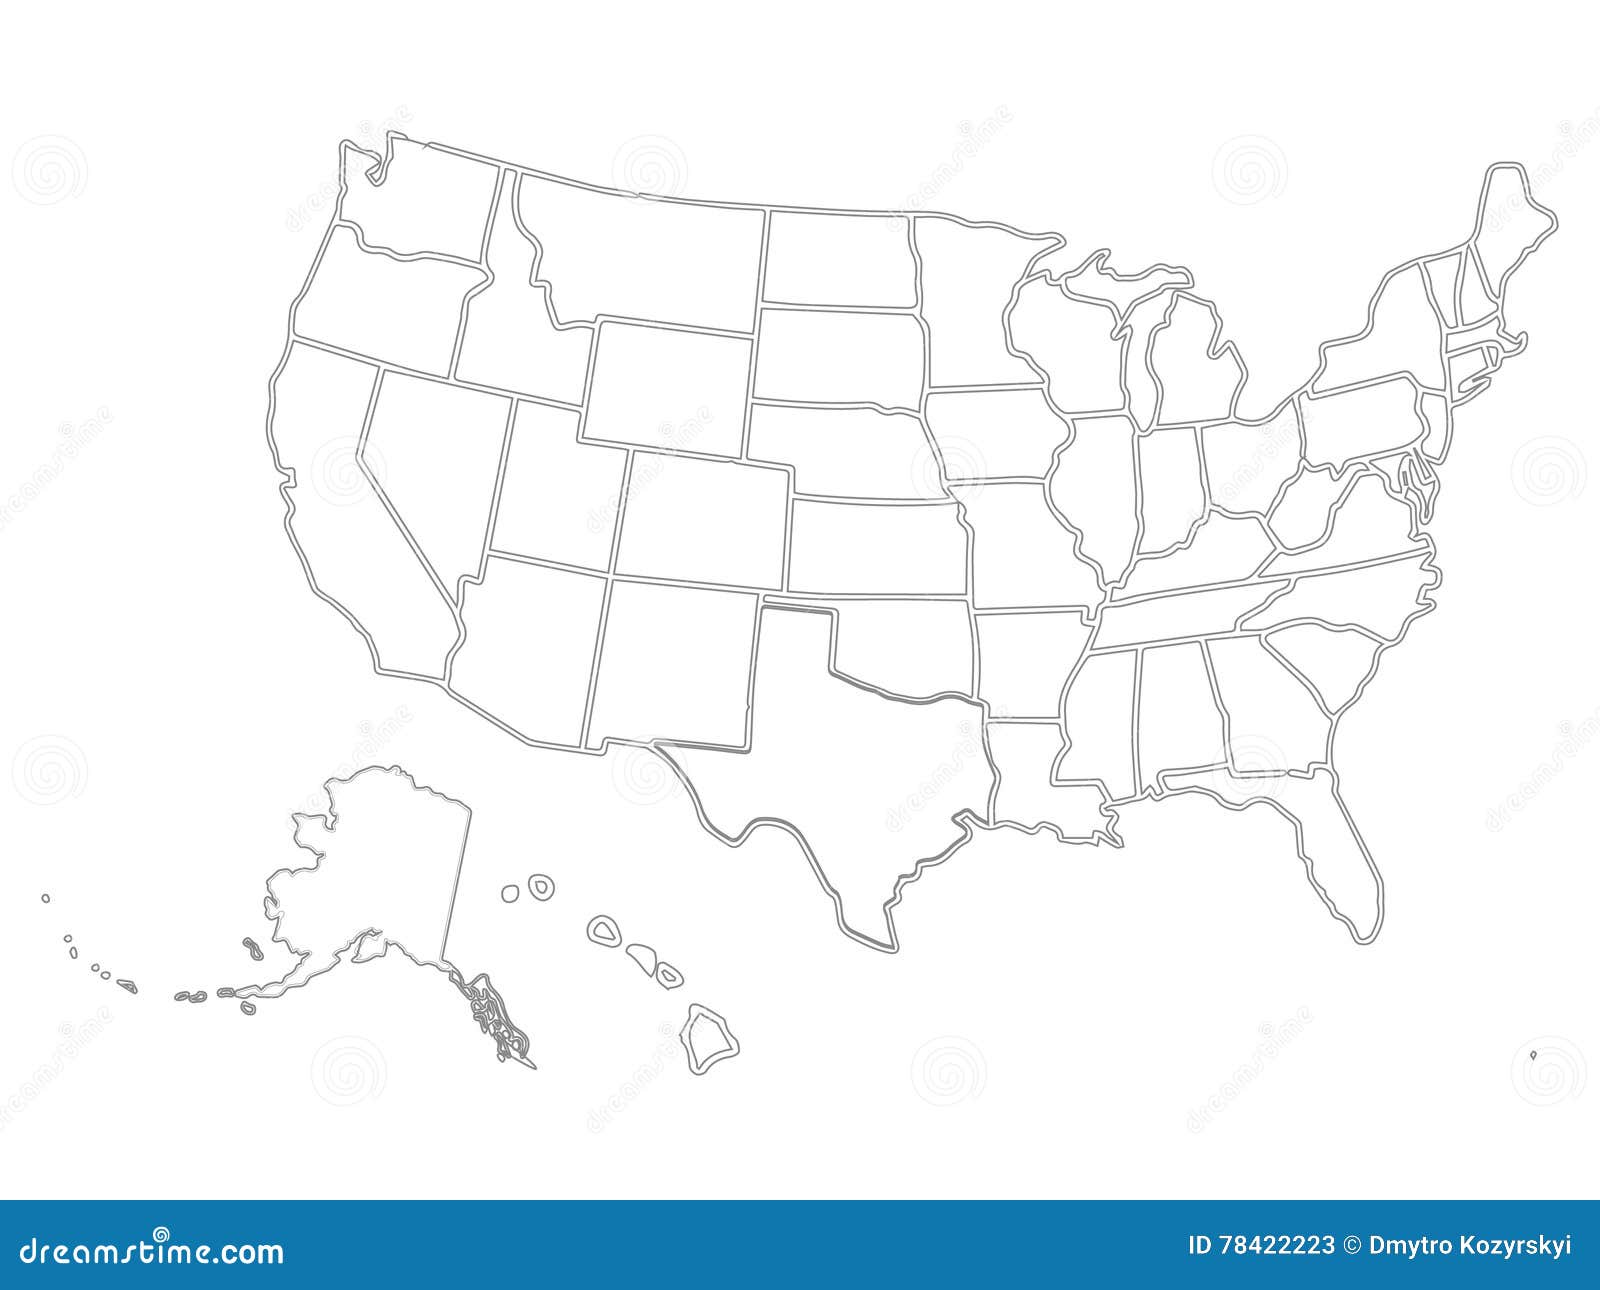 Blank Similar USA Map on White Background. United States of Throughout Blank Template Of The United States